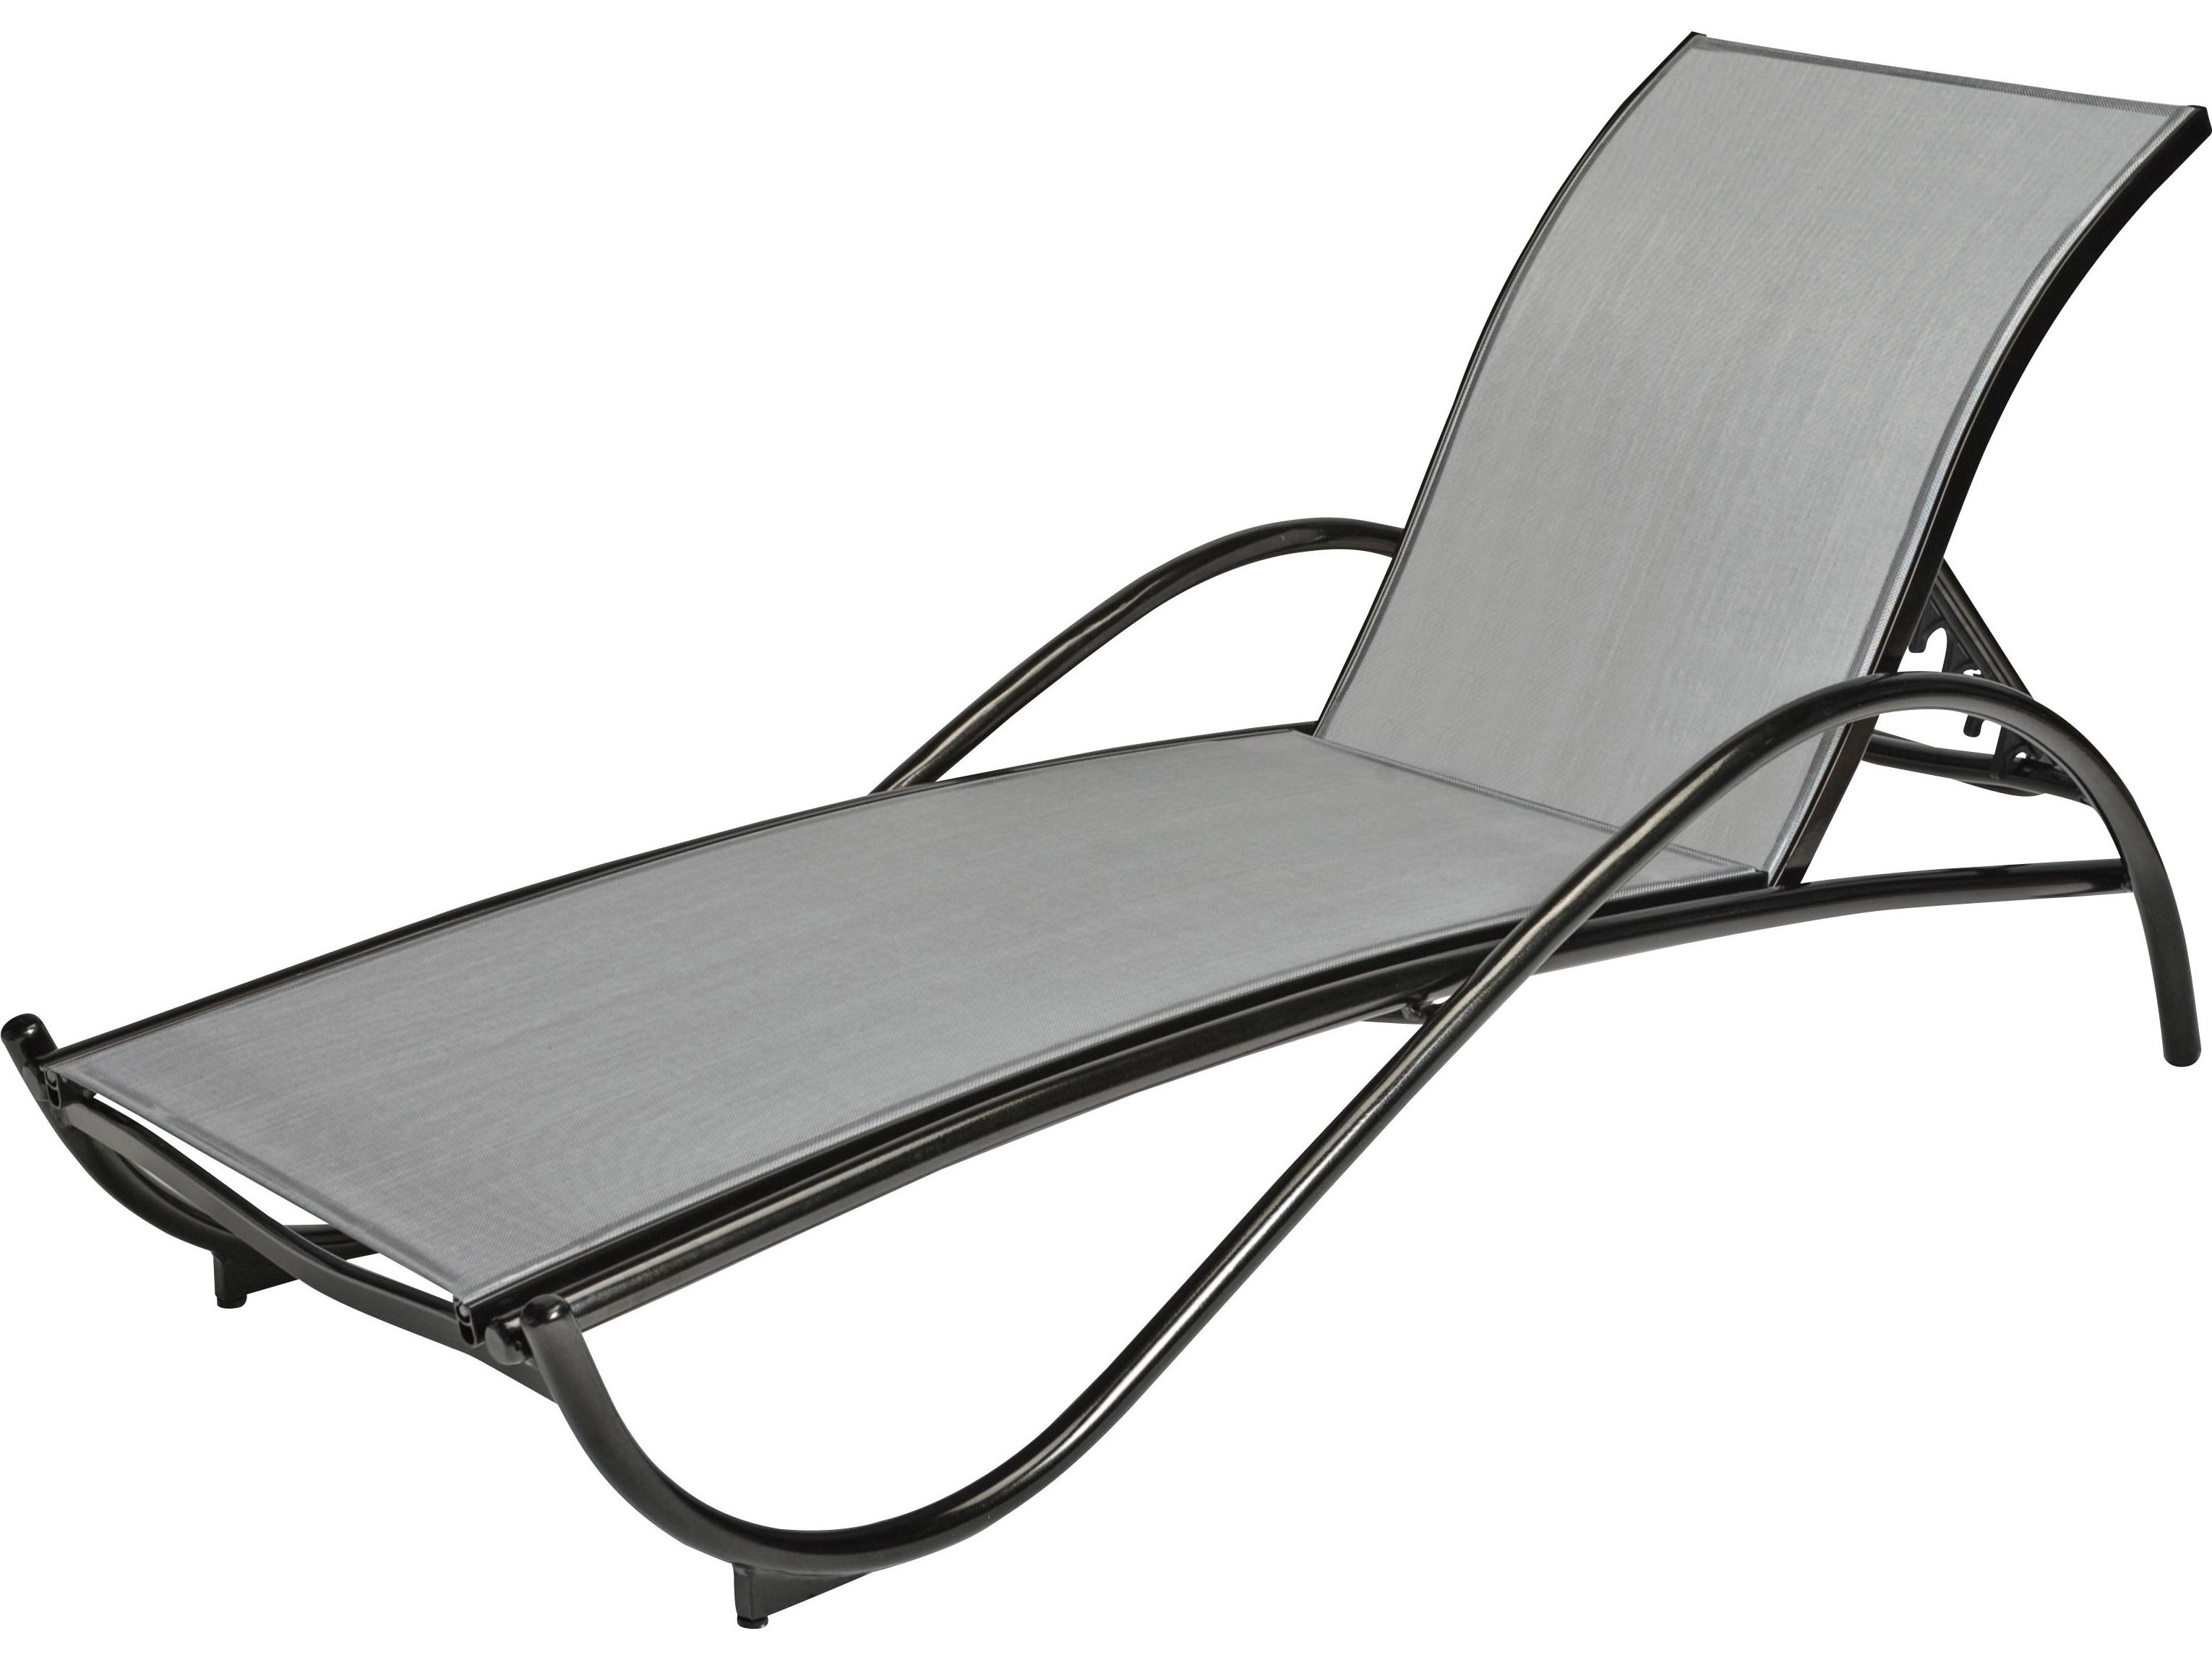 Black Chaise Lounge Outdoor Chairs Intended For Well Known Picture 4 Of 38 – Lounge Outdoor Chairs Elegant Woodard Tribeca (View 15 of 15)